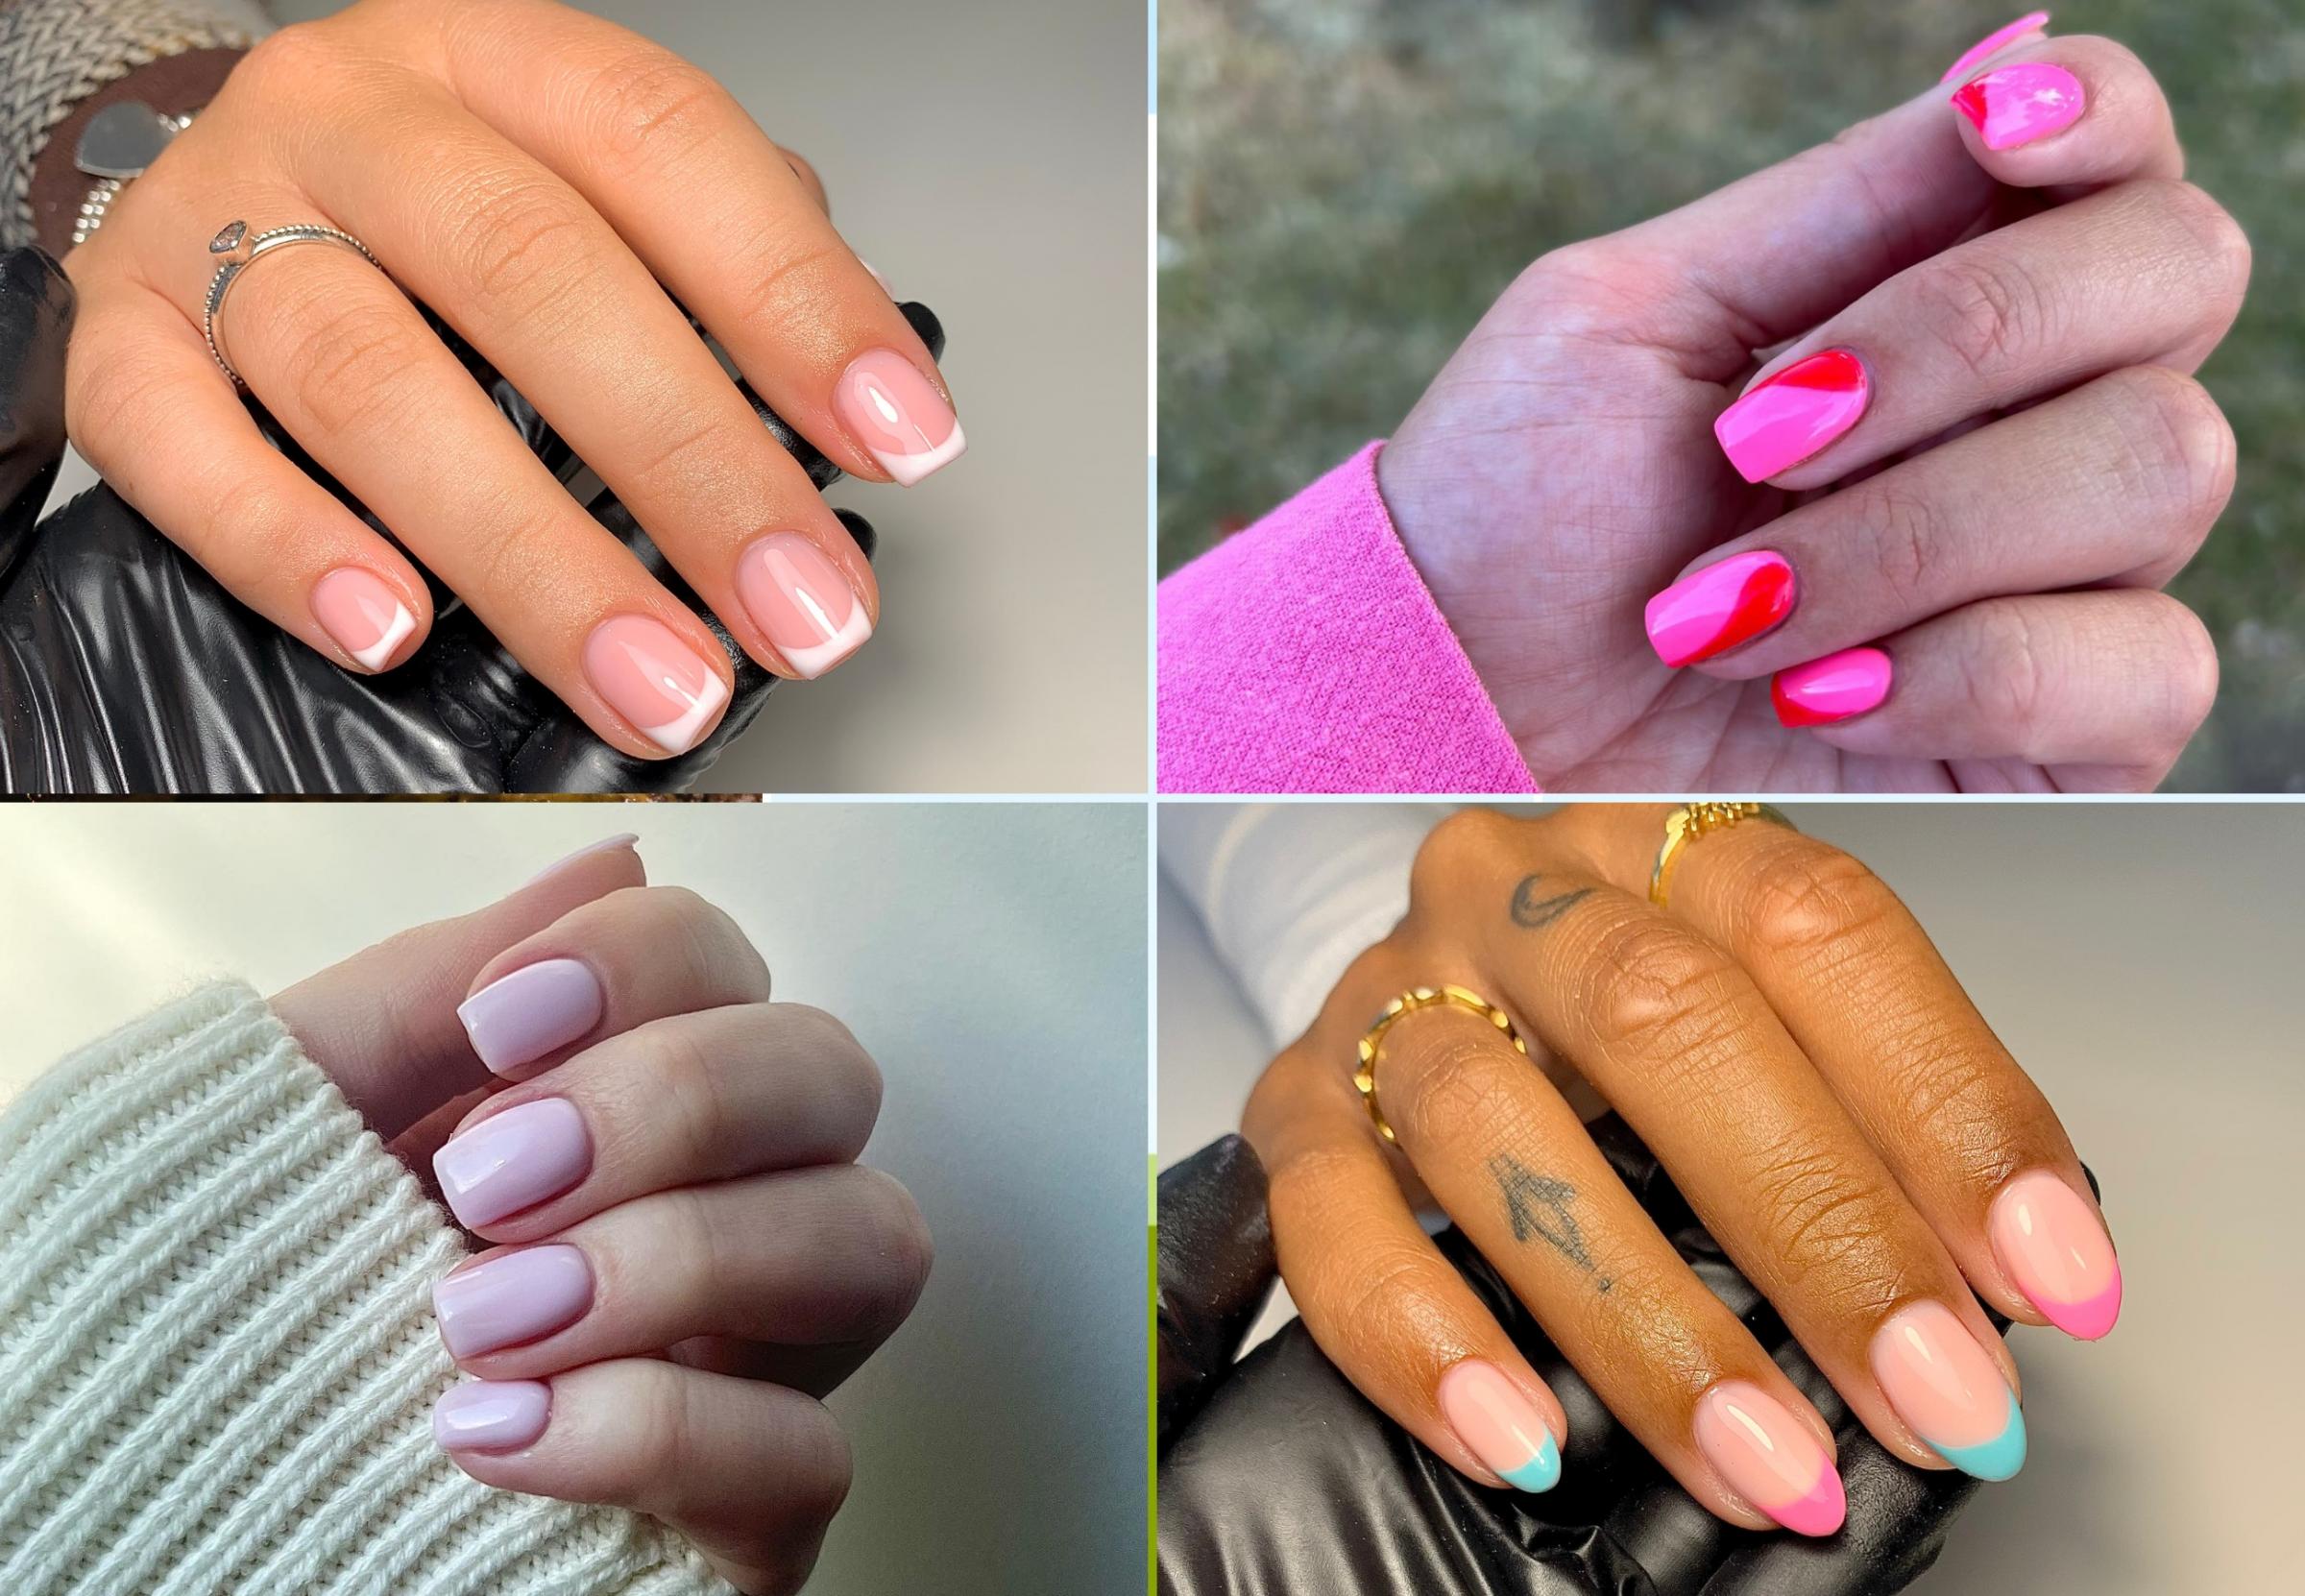 Rhianna specialises in manicures and nails